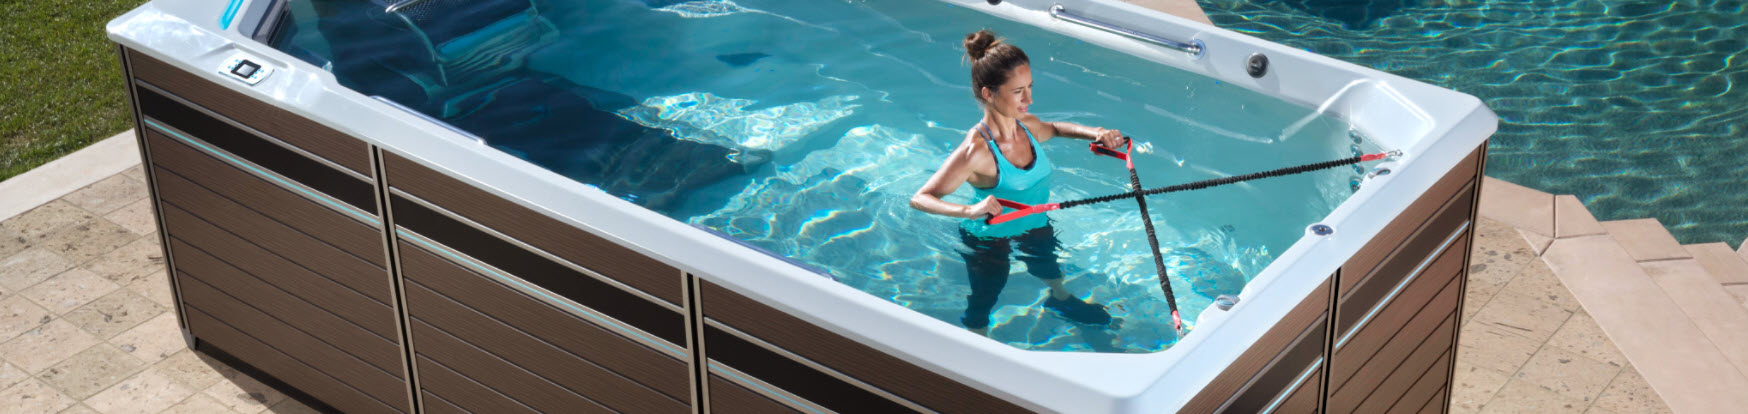 3 Fun Things to Do in a Lap Pool, Swim Spas on Sale Near Me Fitchburg